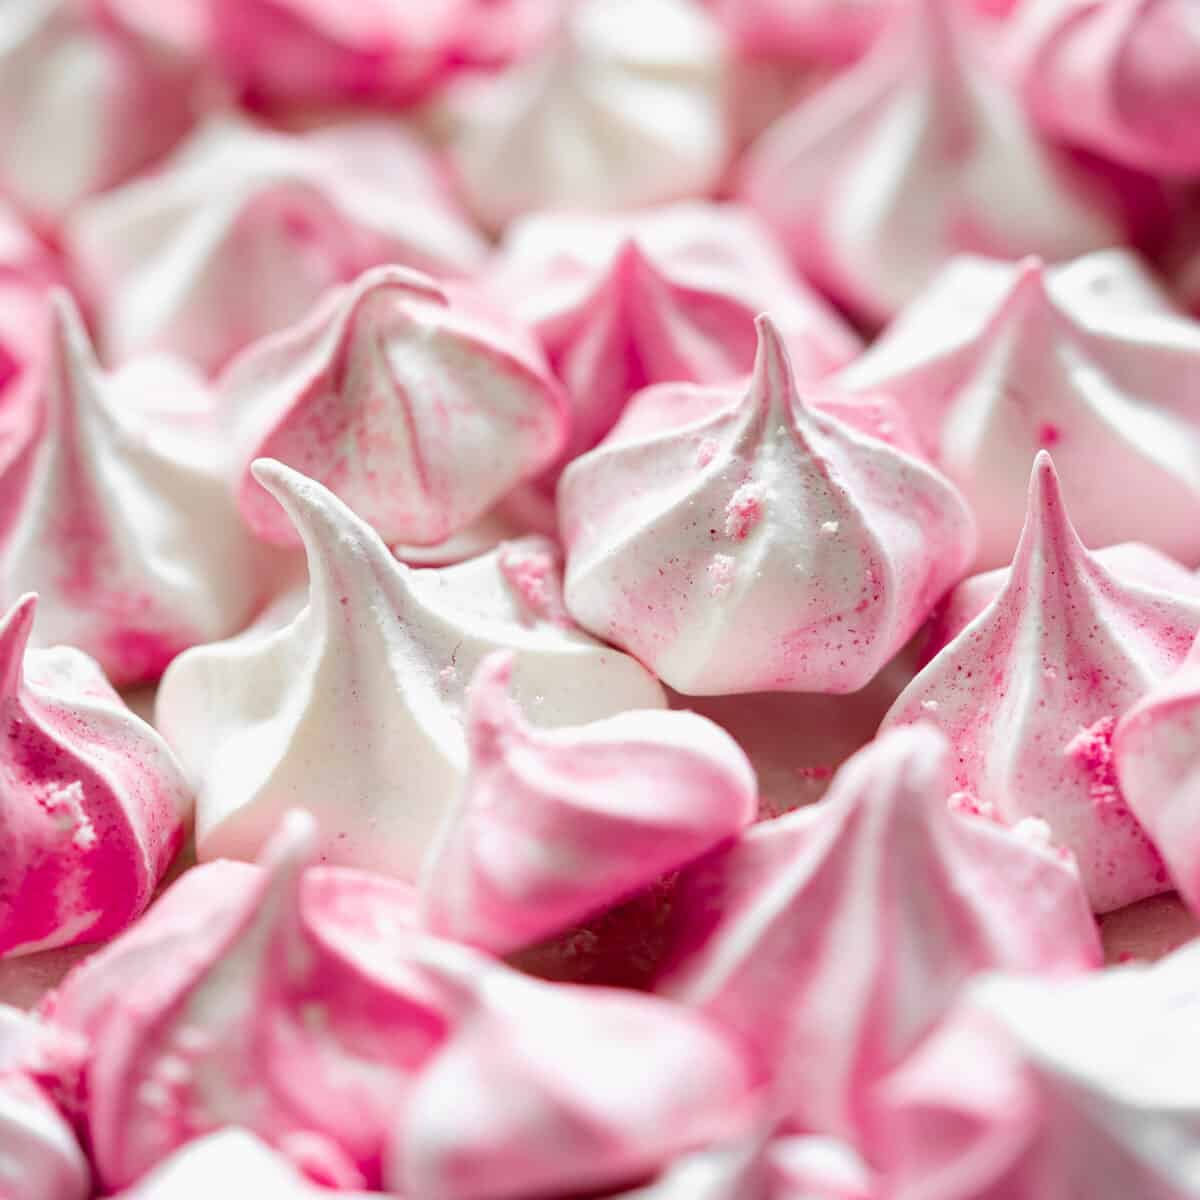 close up of pink and white meringue kisses with aquafaba.